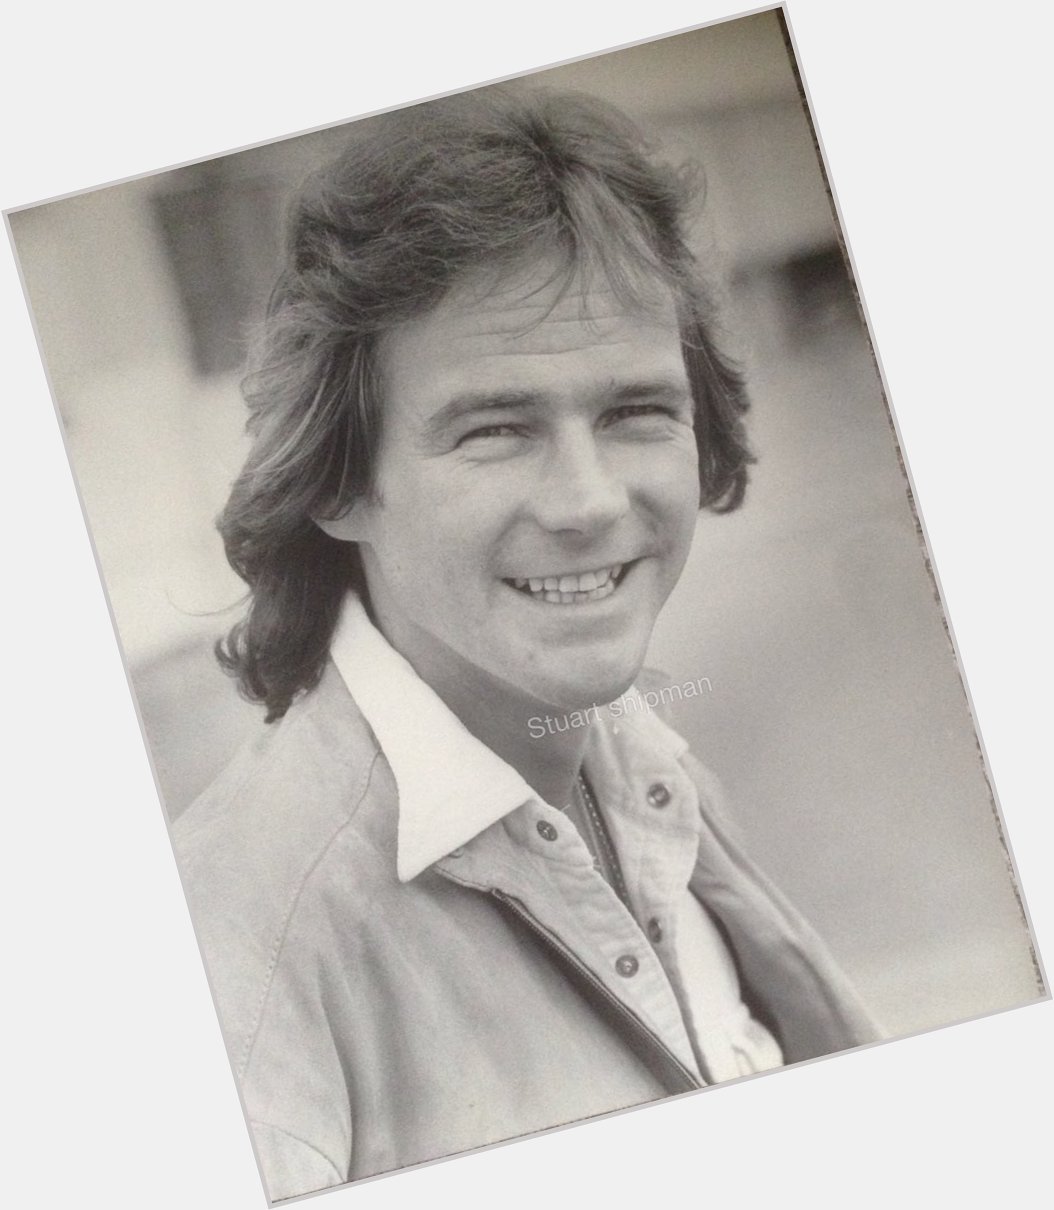 Happy birthday Barry Sheene would have been 68 today..... 